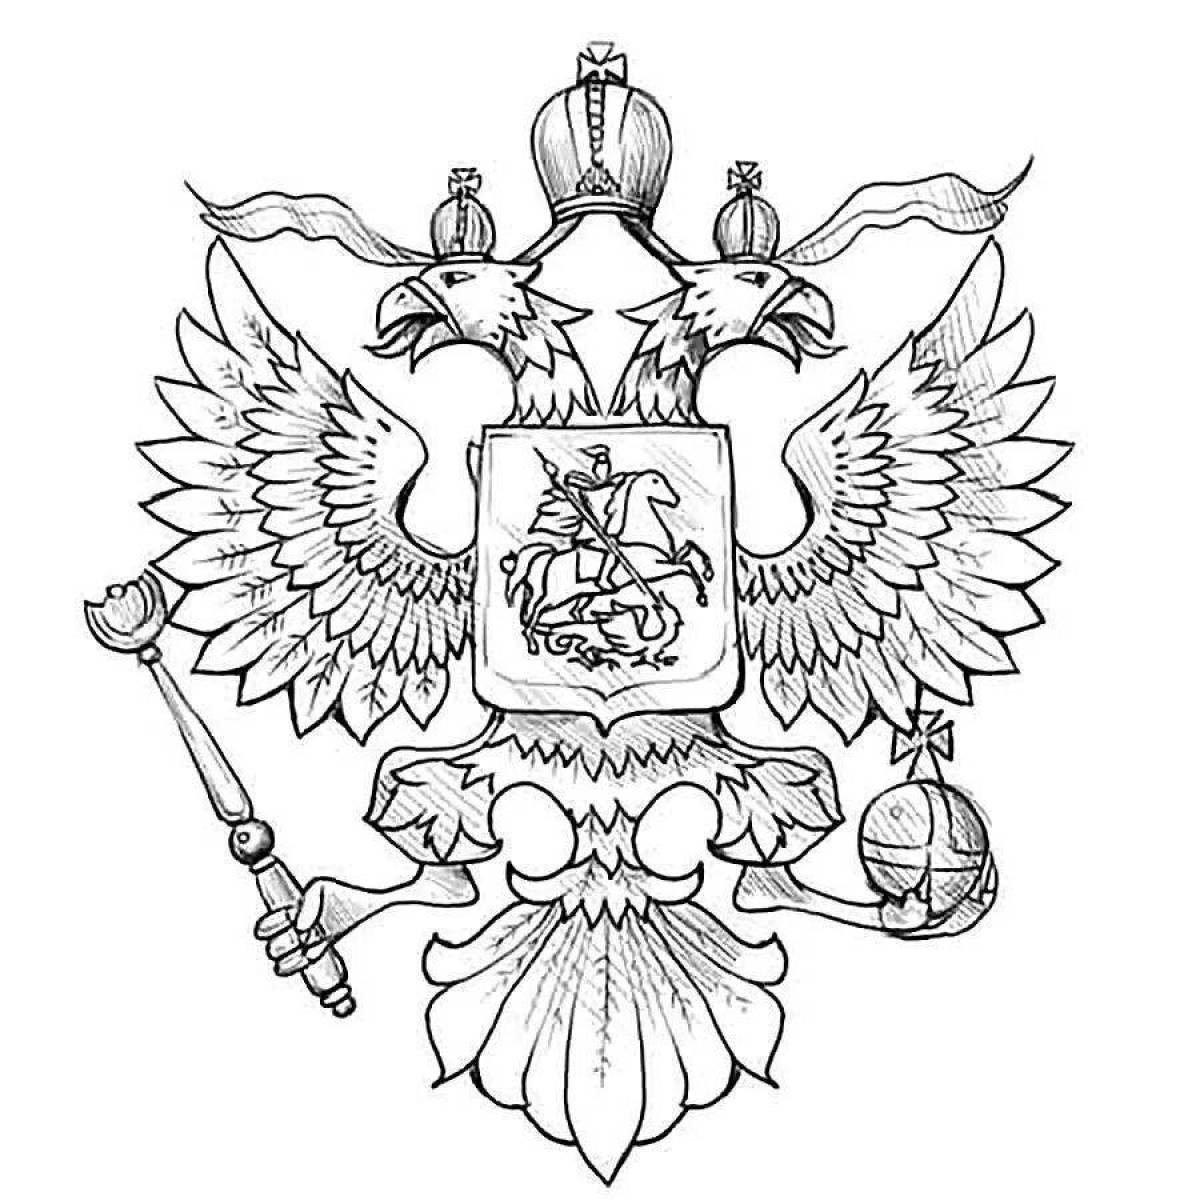 Coat of arms of the Russian Federation #11